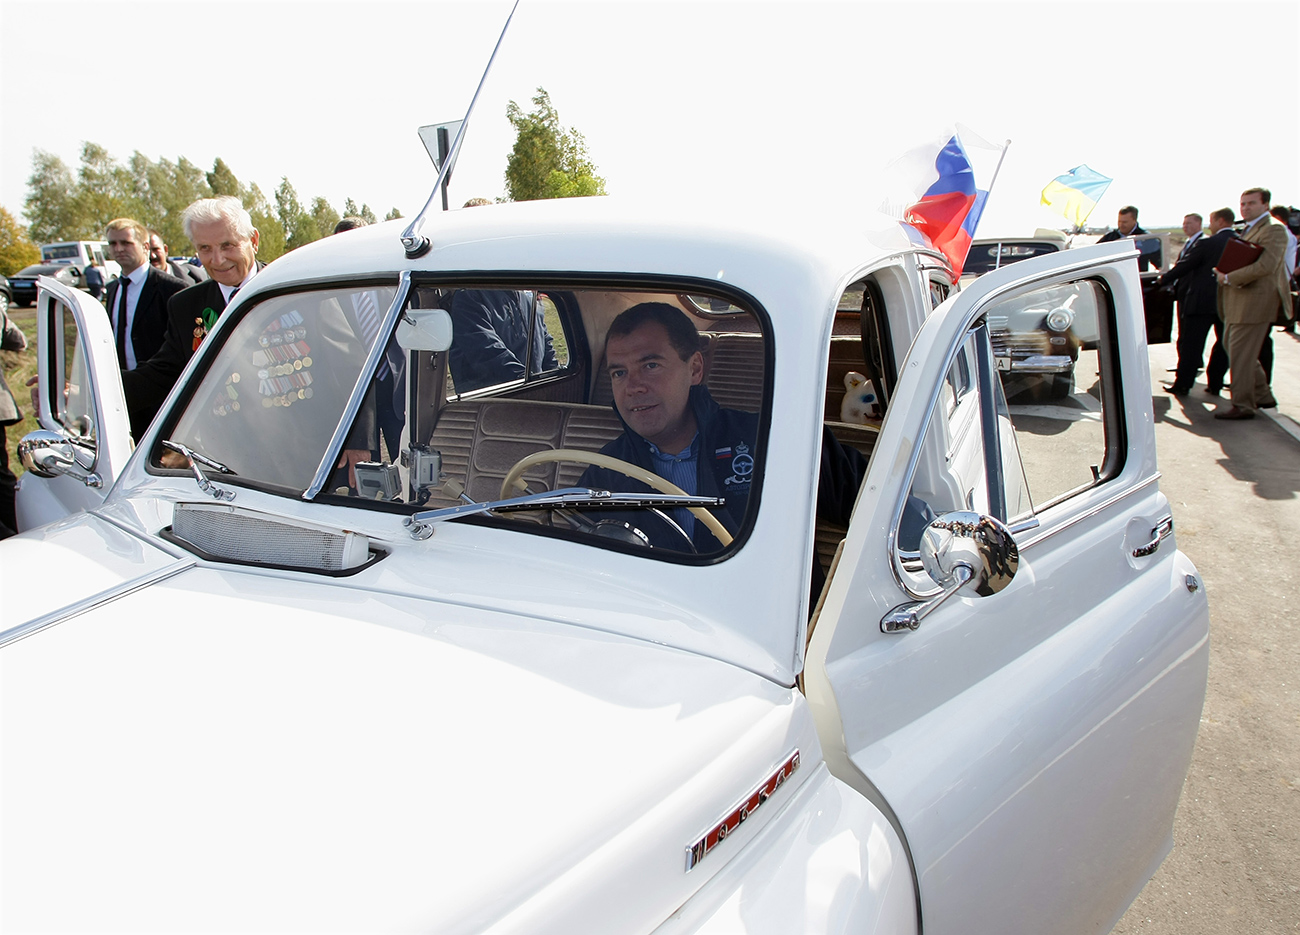 Dmitry Medvedev, Russia's President at the time of the photo, waits for a Great Patriotic War veteran to step into Medvedev's Pobeda car shortly before the start of the cross-border section of the St. Petersburg-to-Kiev Rally, the event celebrating the 100th anniversary of the first Russian motor rally, the Nicholas II Cup (a.k.a. the Tsar Cup). Source: Vladimir Rodionov/TASS